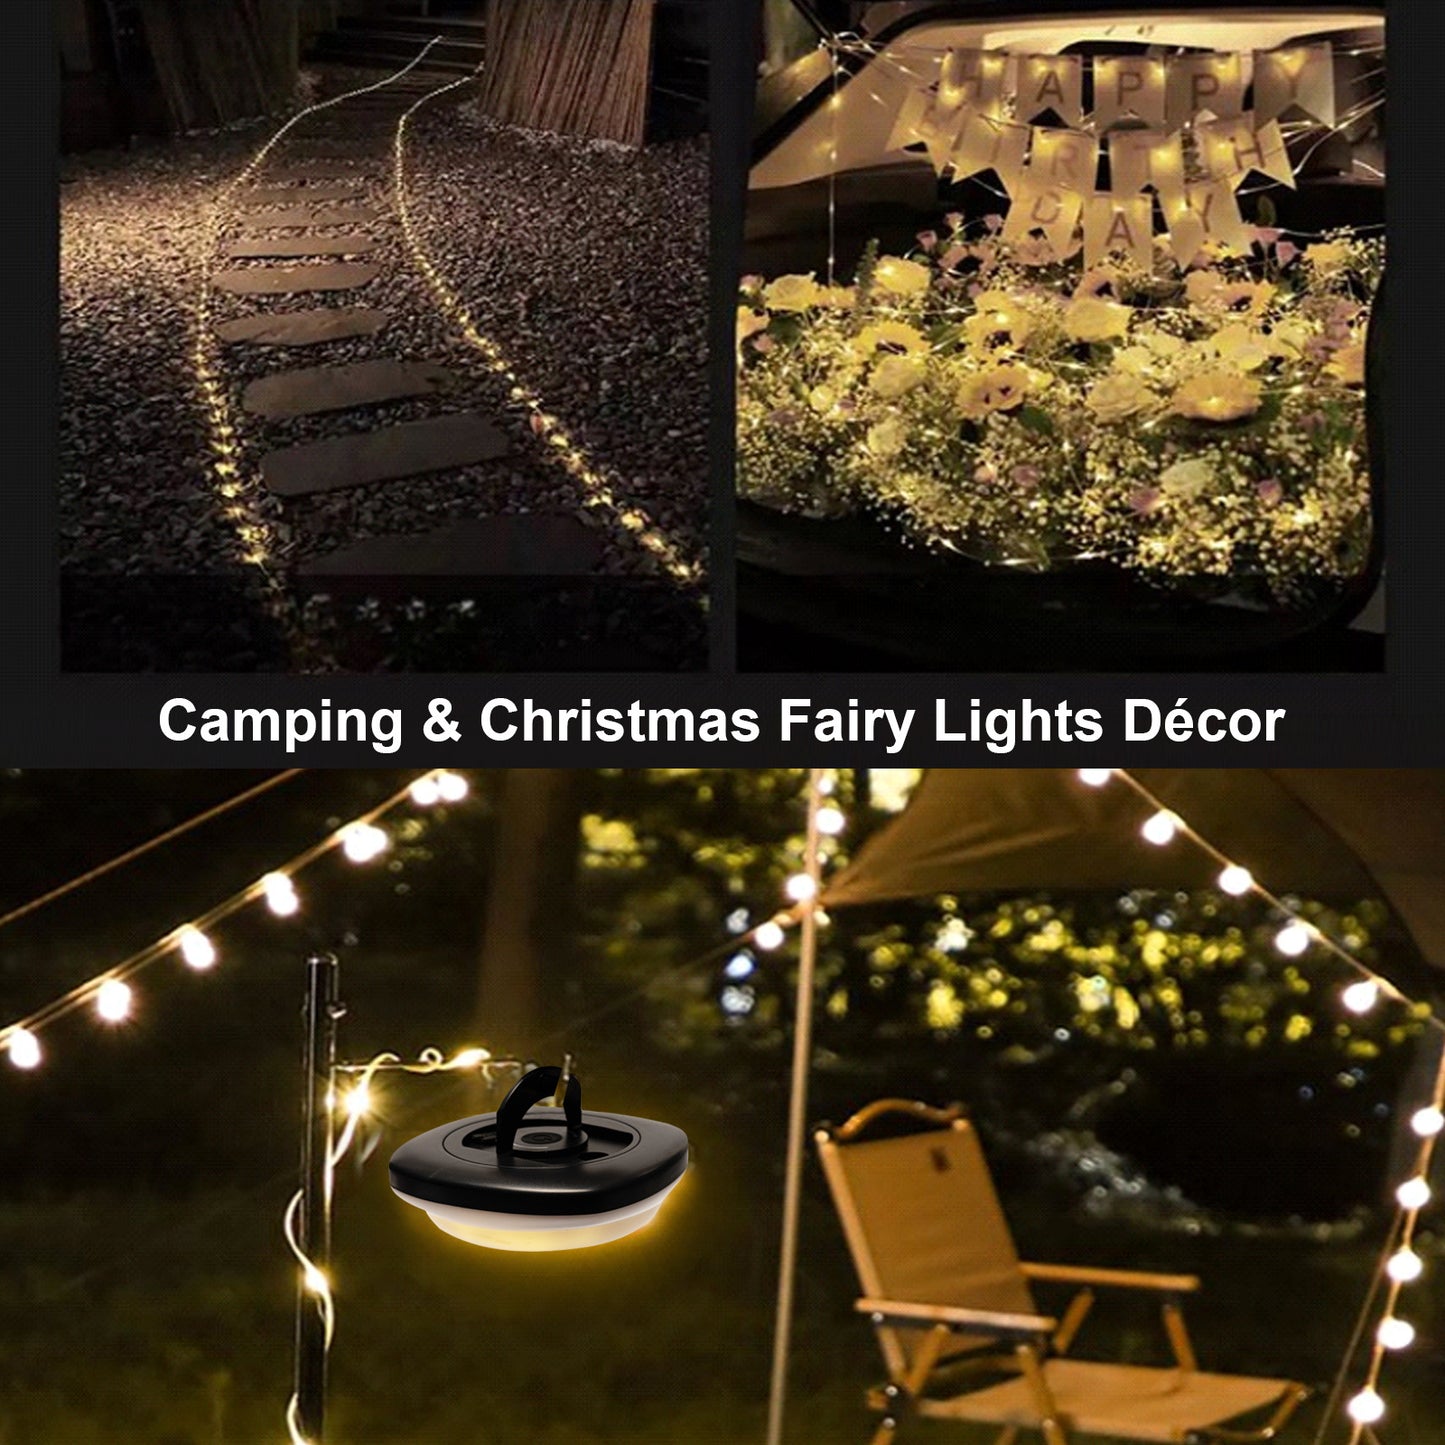 Wanjo Outdoor String Camping Lights , 5 Modes Dual Mode Adventure Tent Lantern (35Ft), Quick 30s Recovery,Portable Versatile Camping Lamp with Carry Bag for Camping,Christmas Fairy Lights Décor